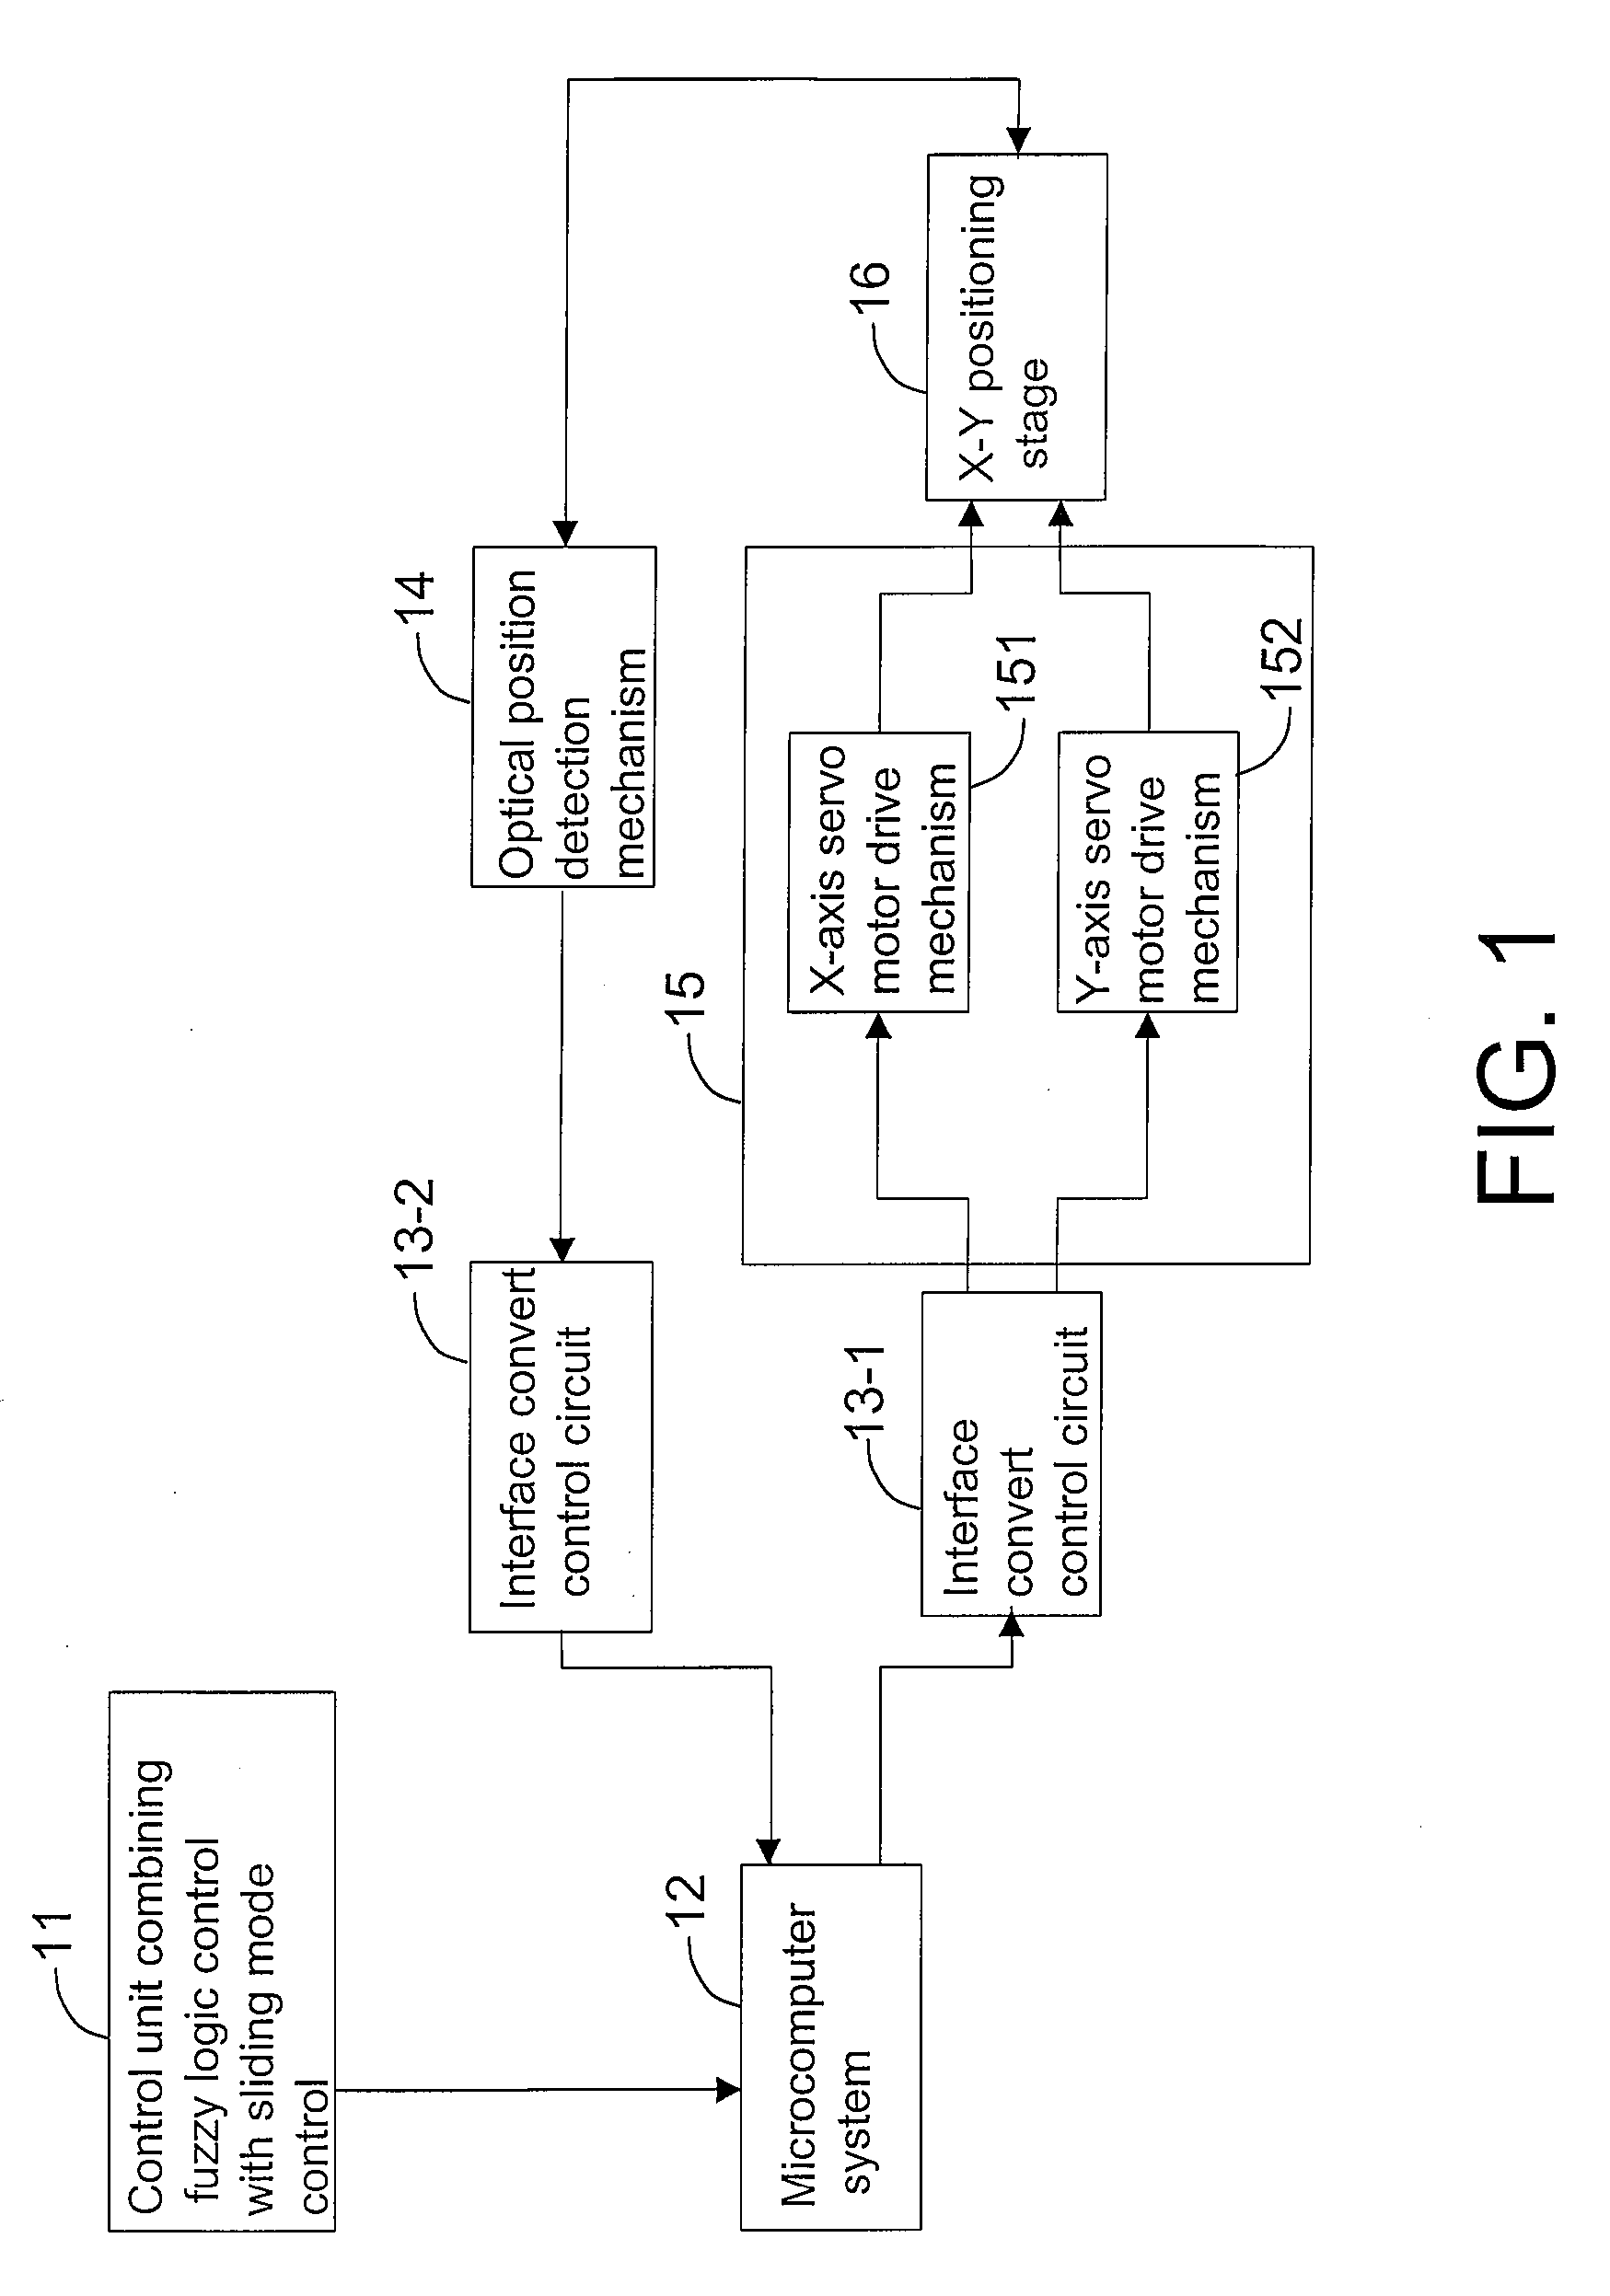 Control method combining fuzzy logic control with sliding mode control for ideal dynamic responses